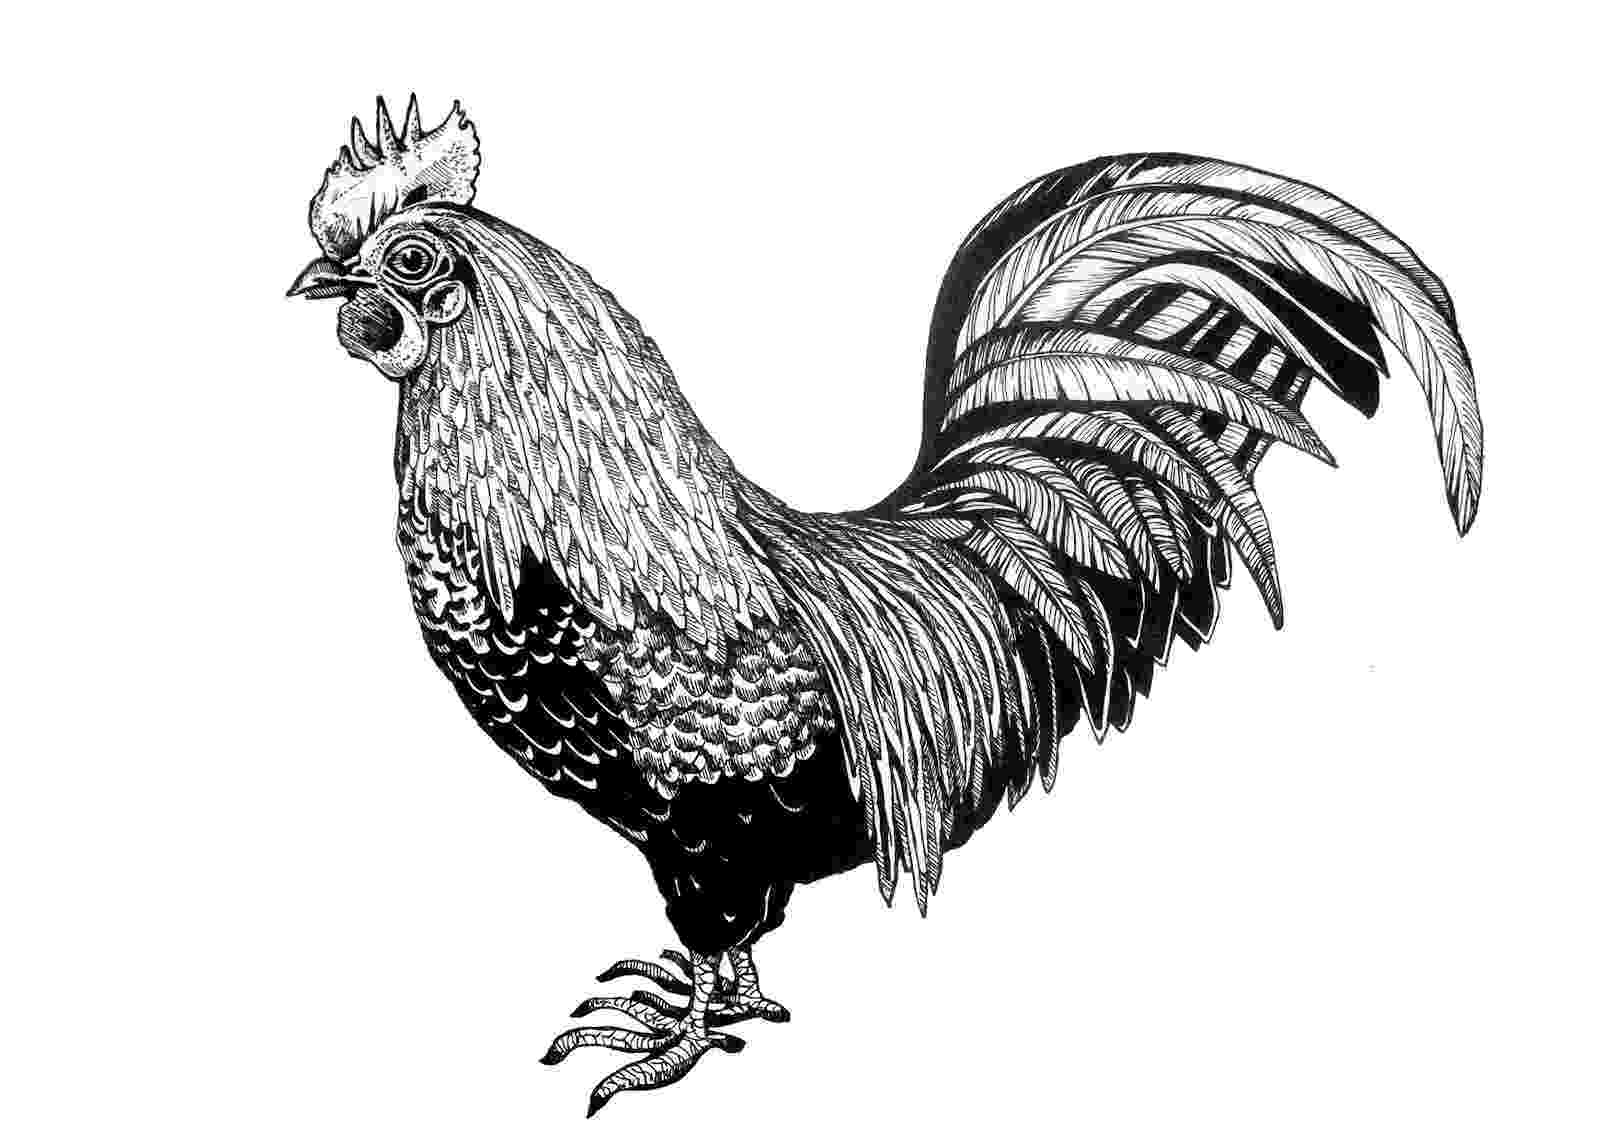 rooster sketch 1000 images about 10 day observation ideas on pinterest rooster sketch 